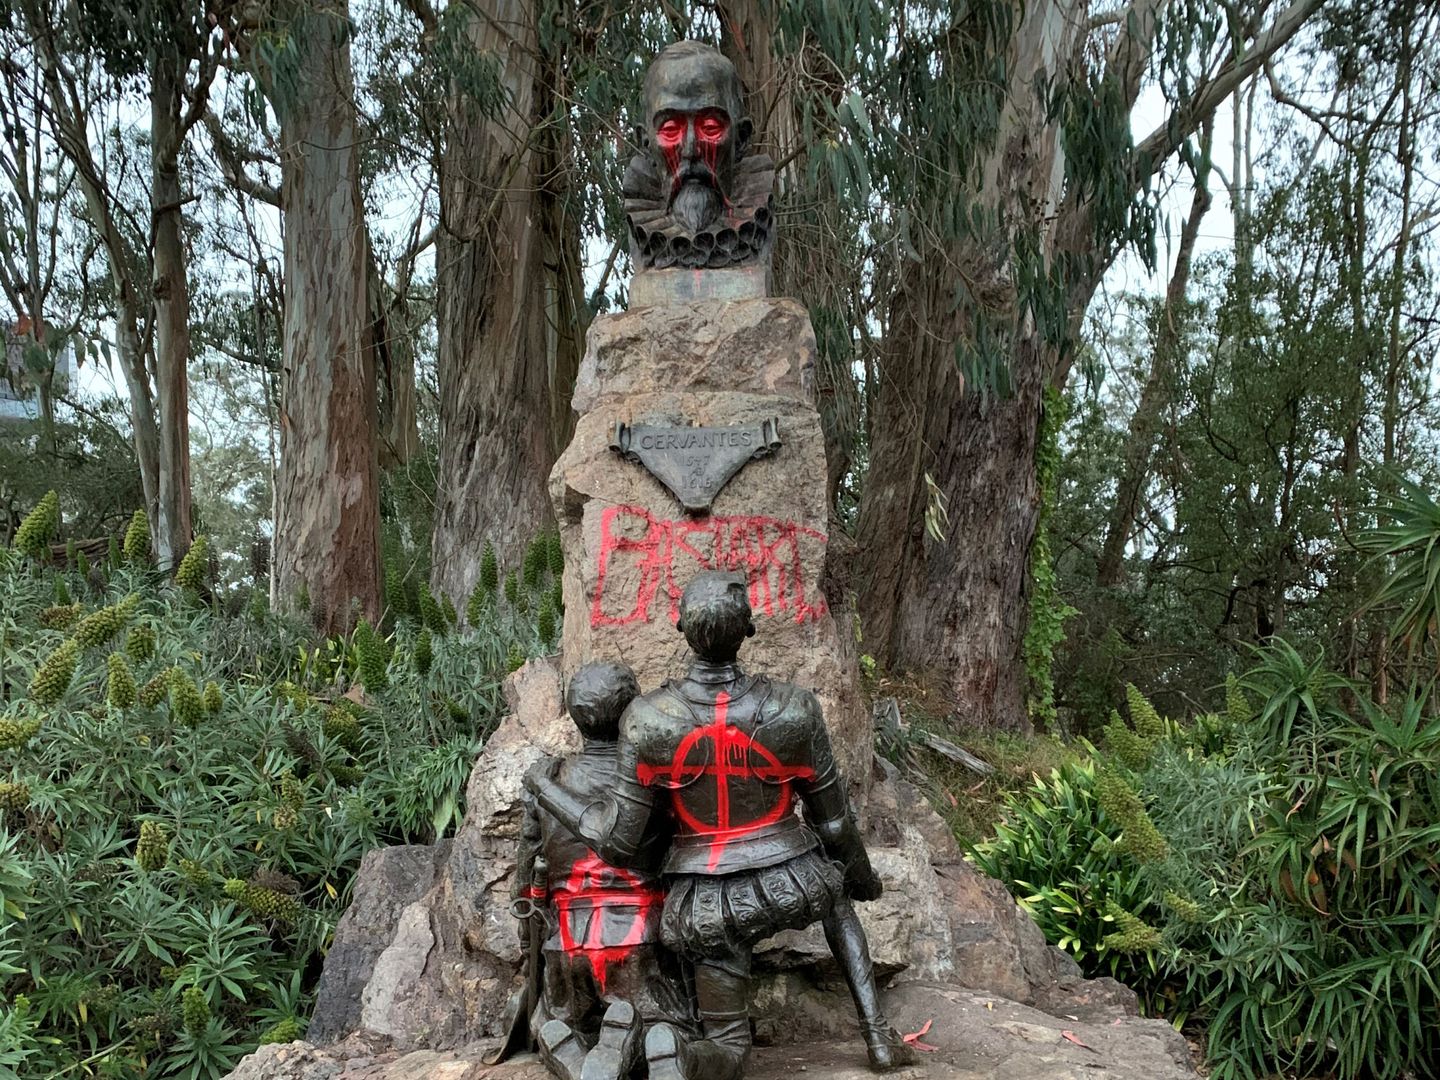 Miguel De Cervantes memorial is vandalised with red spray paint, in San Francisco, California, U.S. June 19, 2020, in this picture obtained from social media. Picture taken June 19, 2020. David Zandman via REUTERS THIS IMAGE HAS BEEN SUPPLIED BY A THIRD PARTY. MANDATORY CREDIT. NO RESALES. NO ARCHIVES.